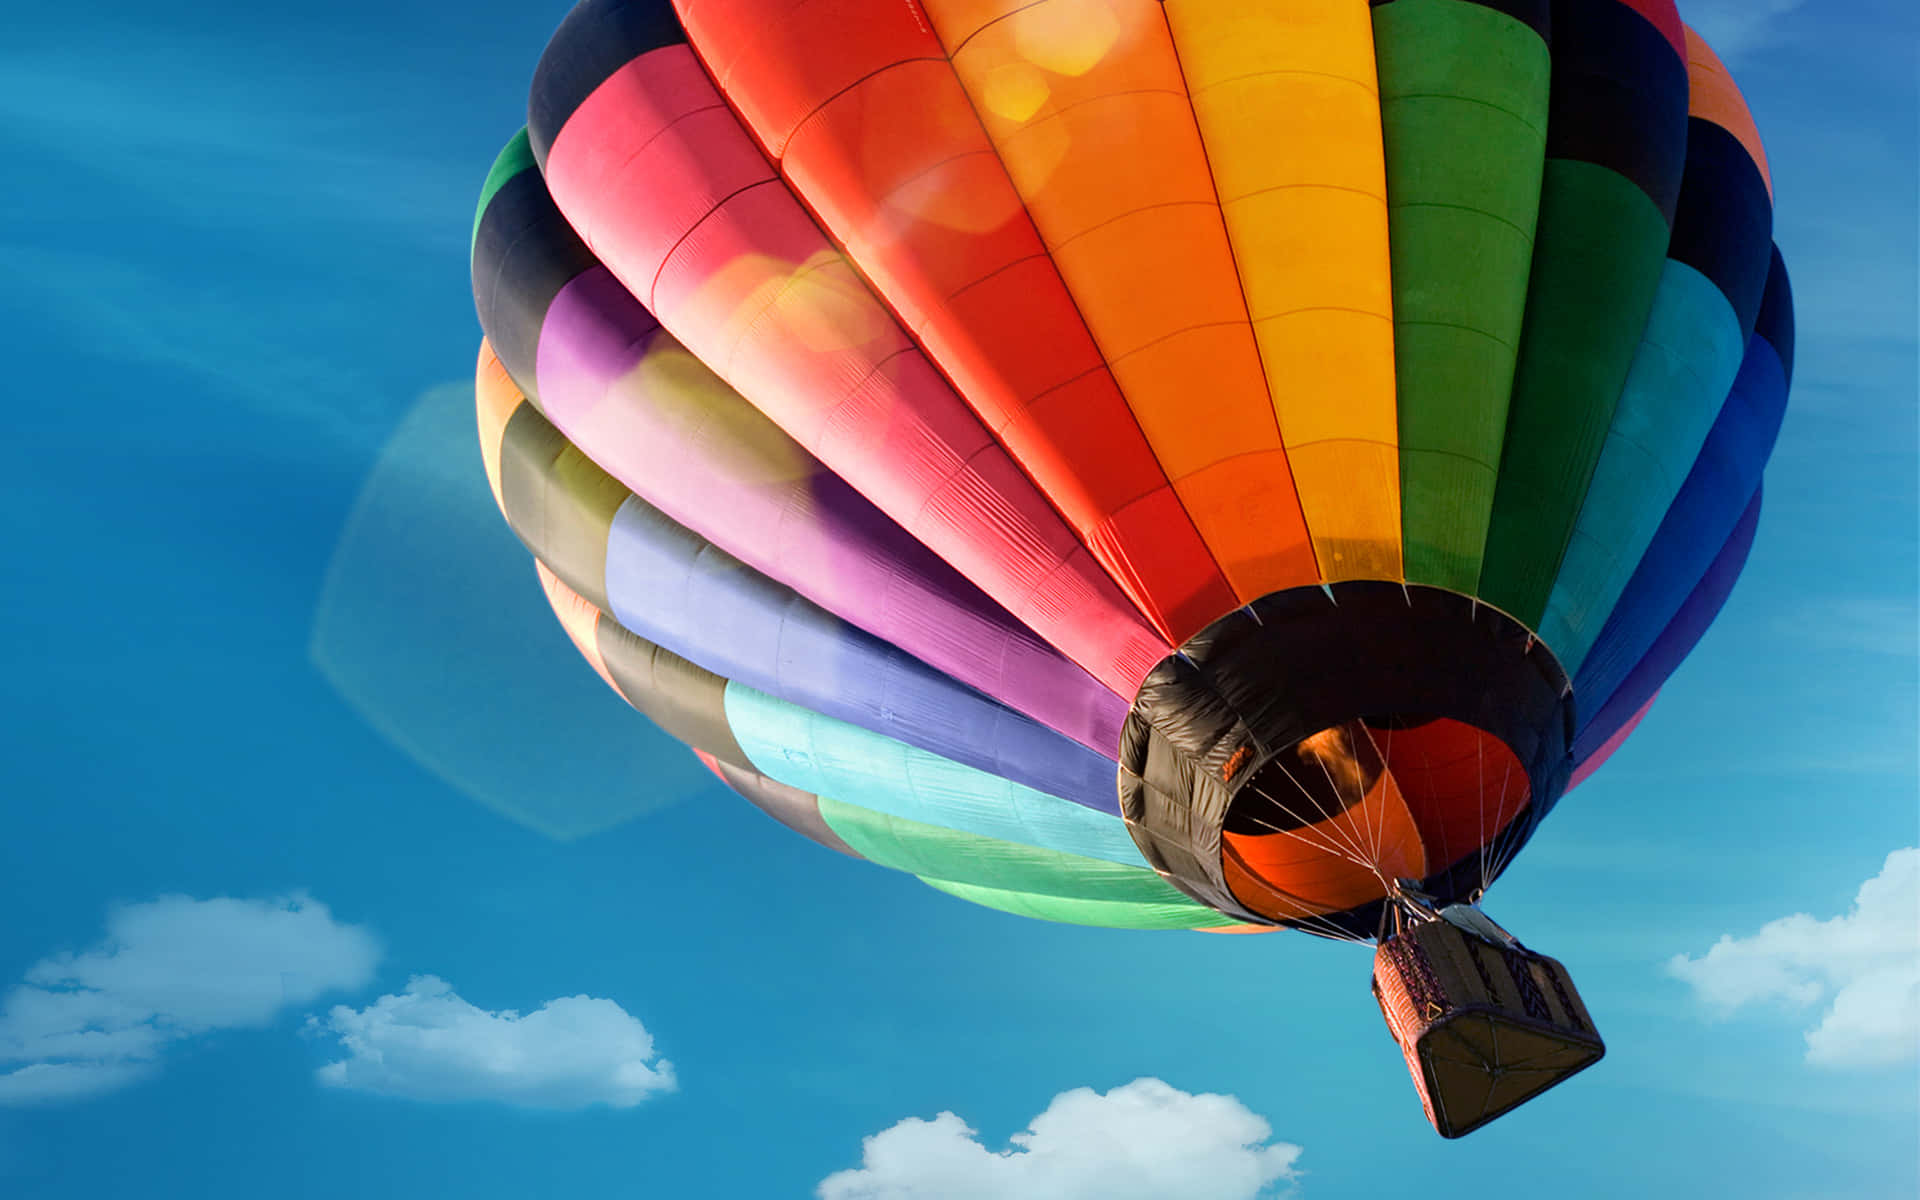 Take Faraway Adventures with a Hot Air Balloon